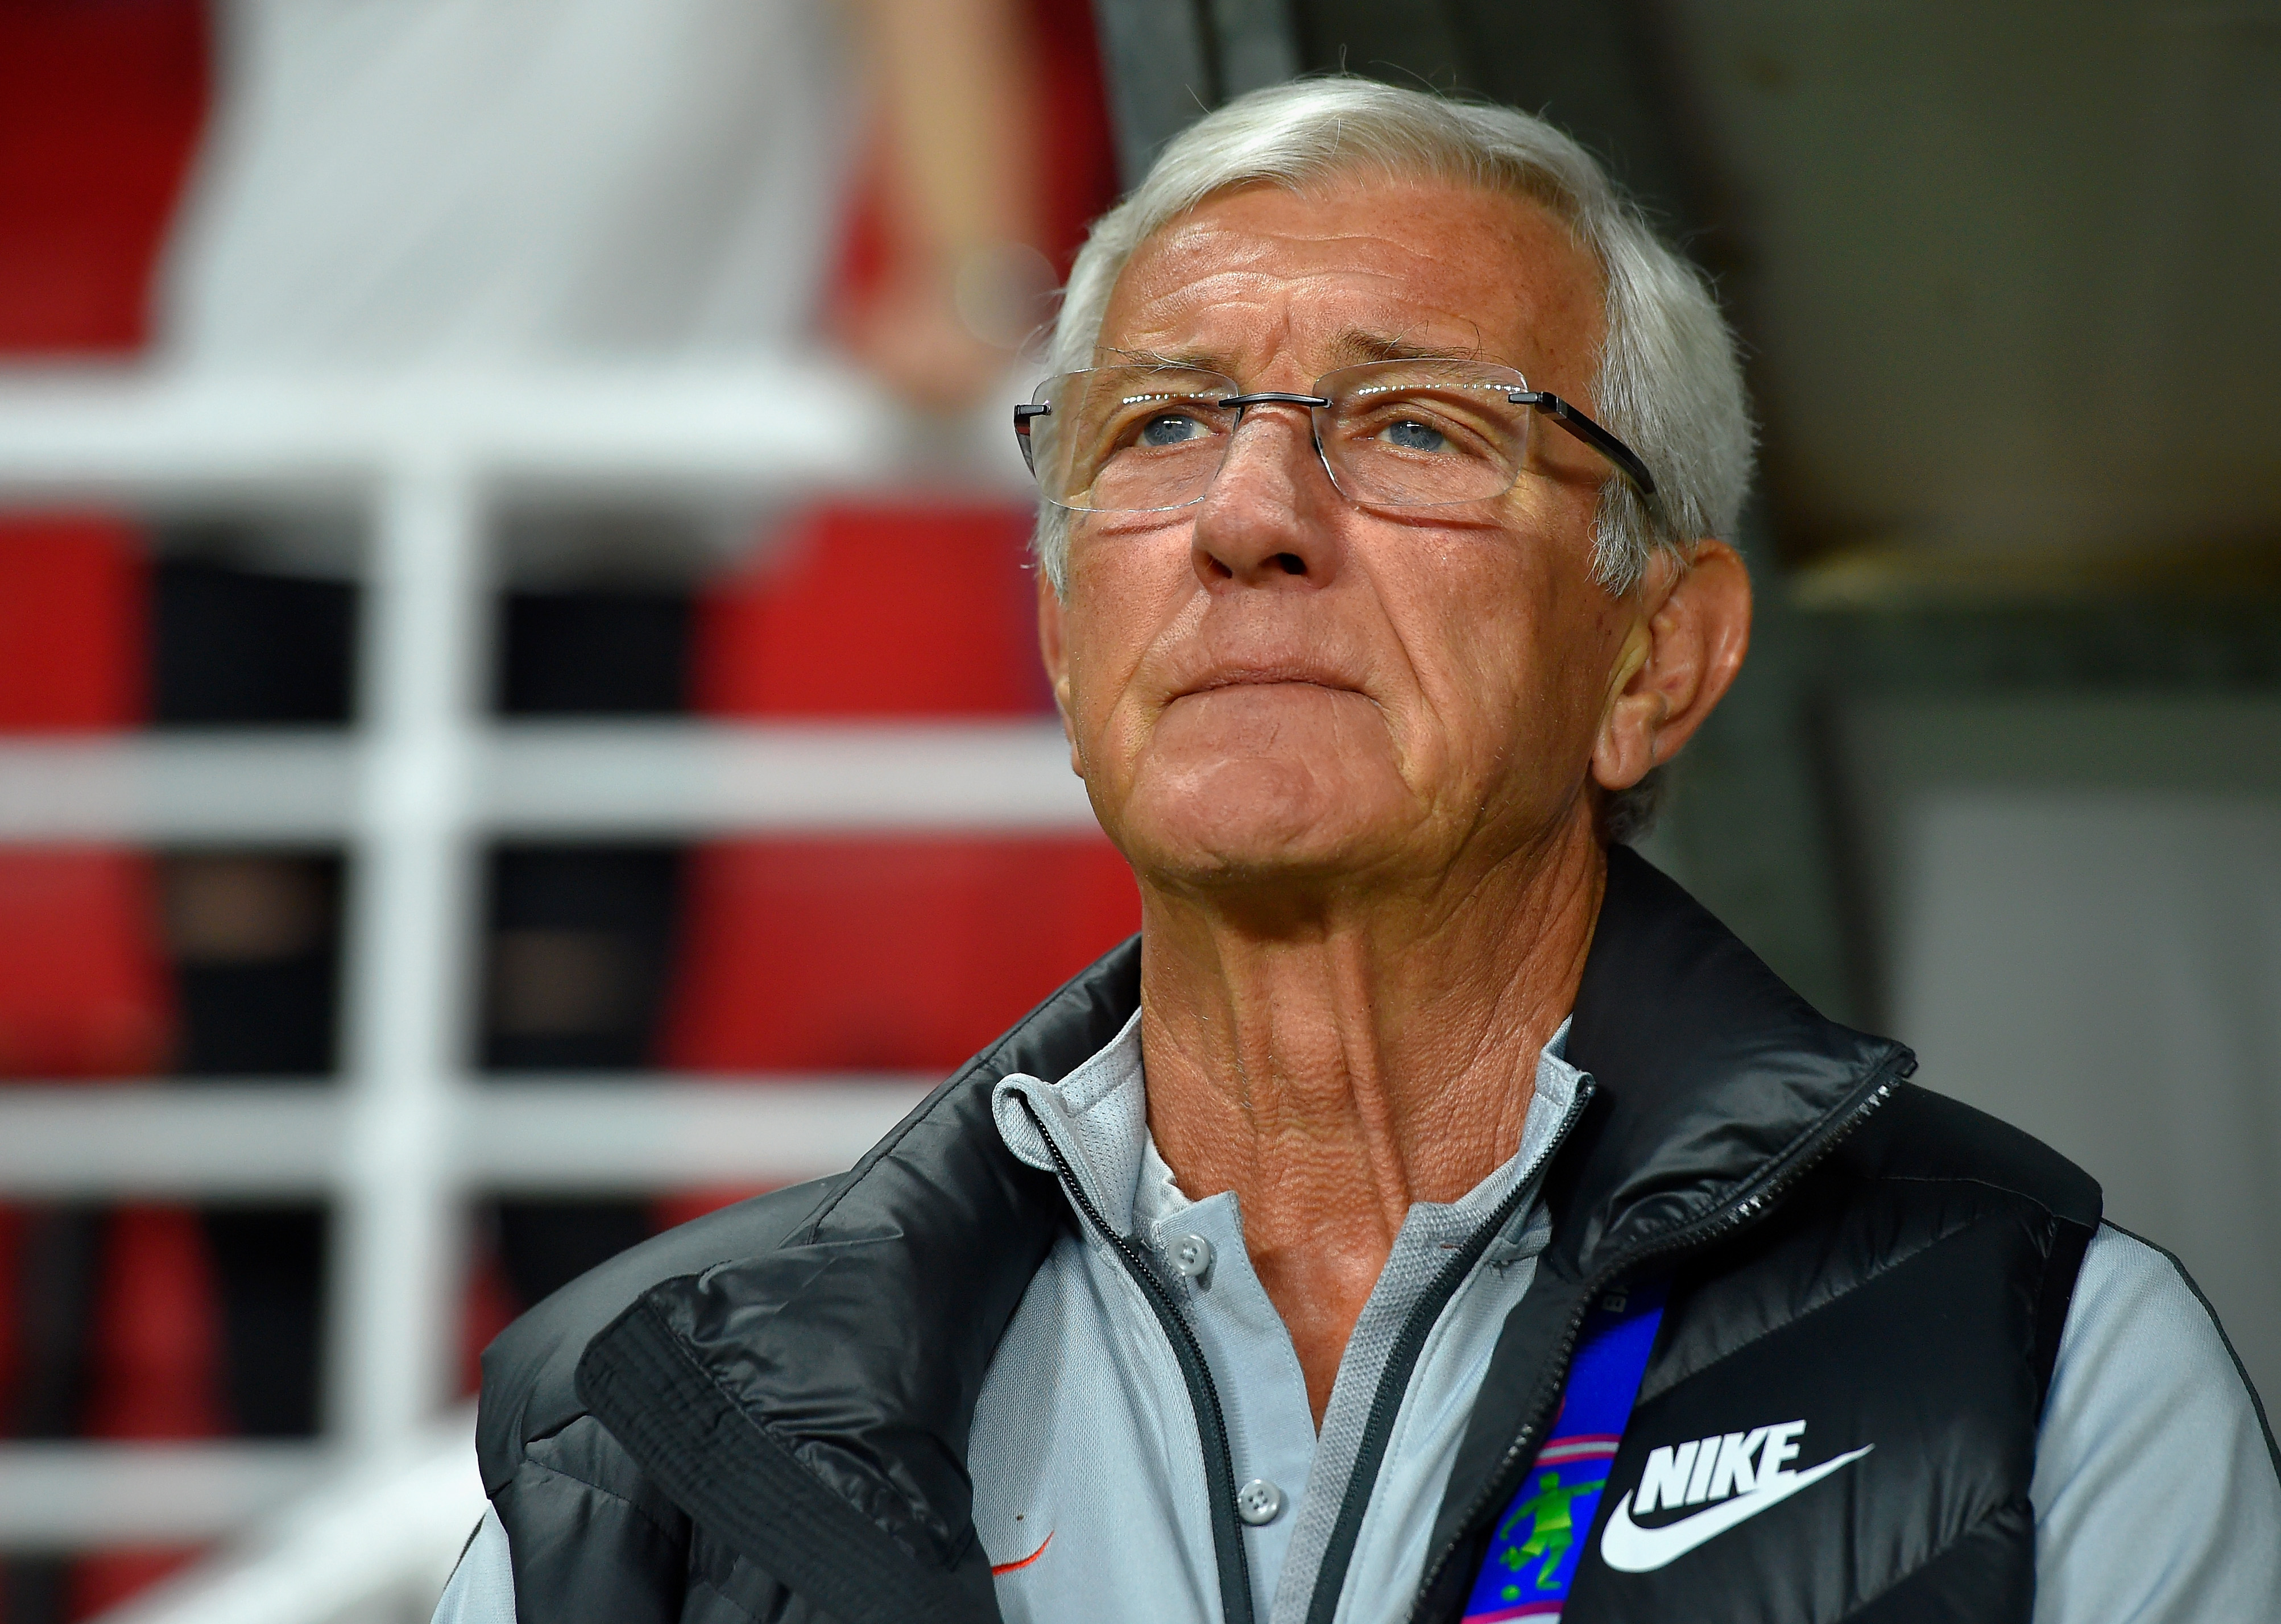 ABU DHABI, UNITED ARAB EMIRATES - JANUARY 24:  Marcello Lippi, Head Coach of China during the AFC Asian Cup quarter final match between China and Iran at Mohammed Bin Zayed Stadium on January 24, 2019 in Abu Dhabi, United Arab Emirates.  (Photo by Koki Nagahama/Getty Images)